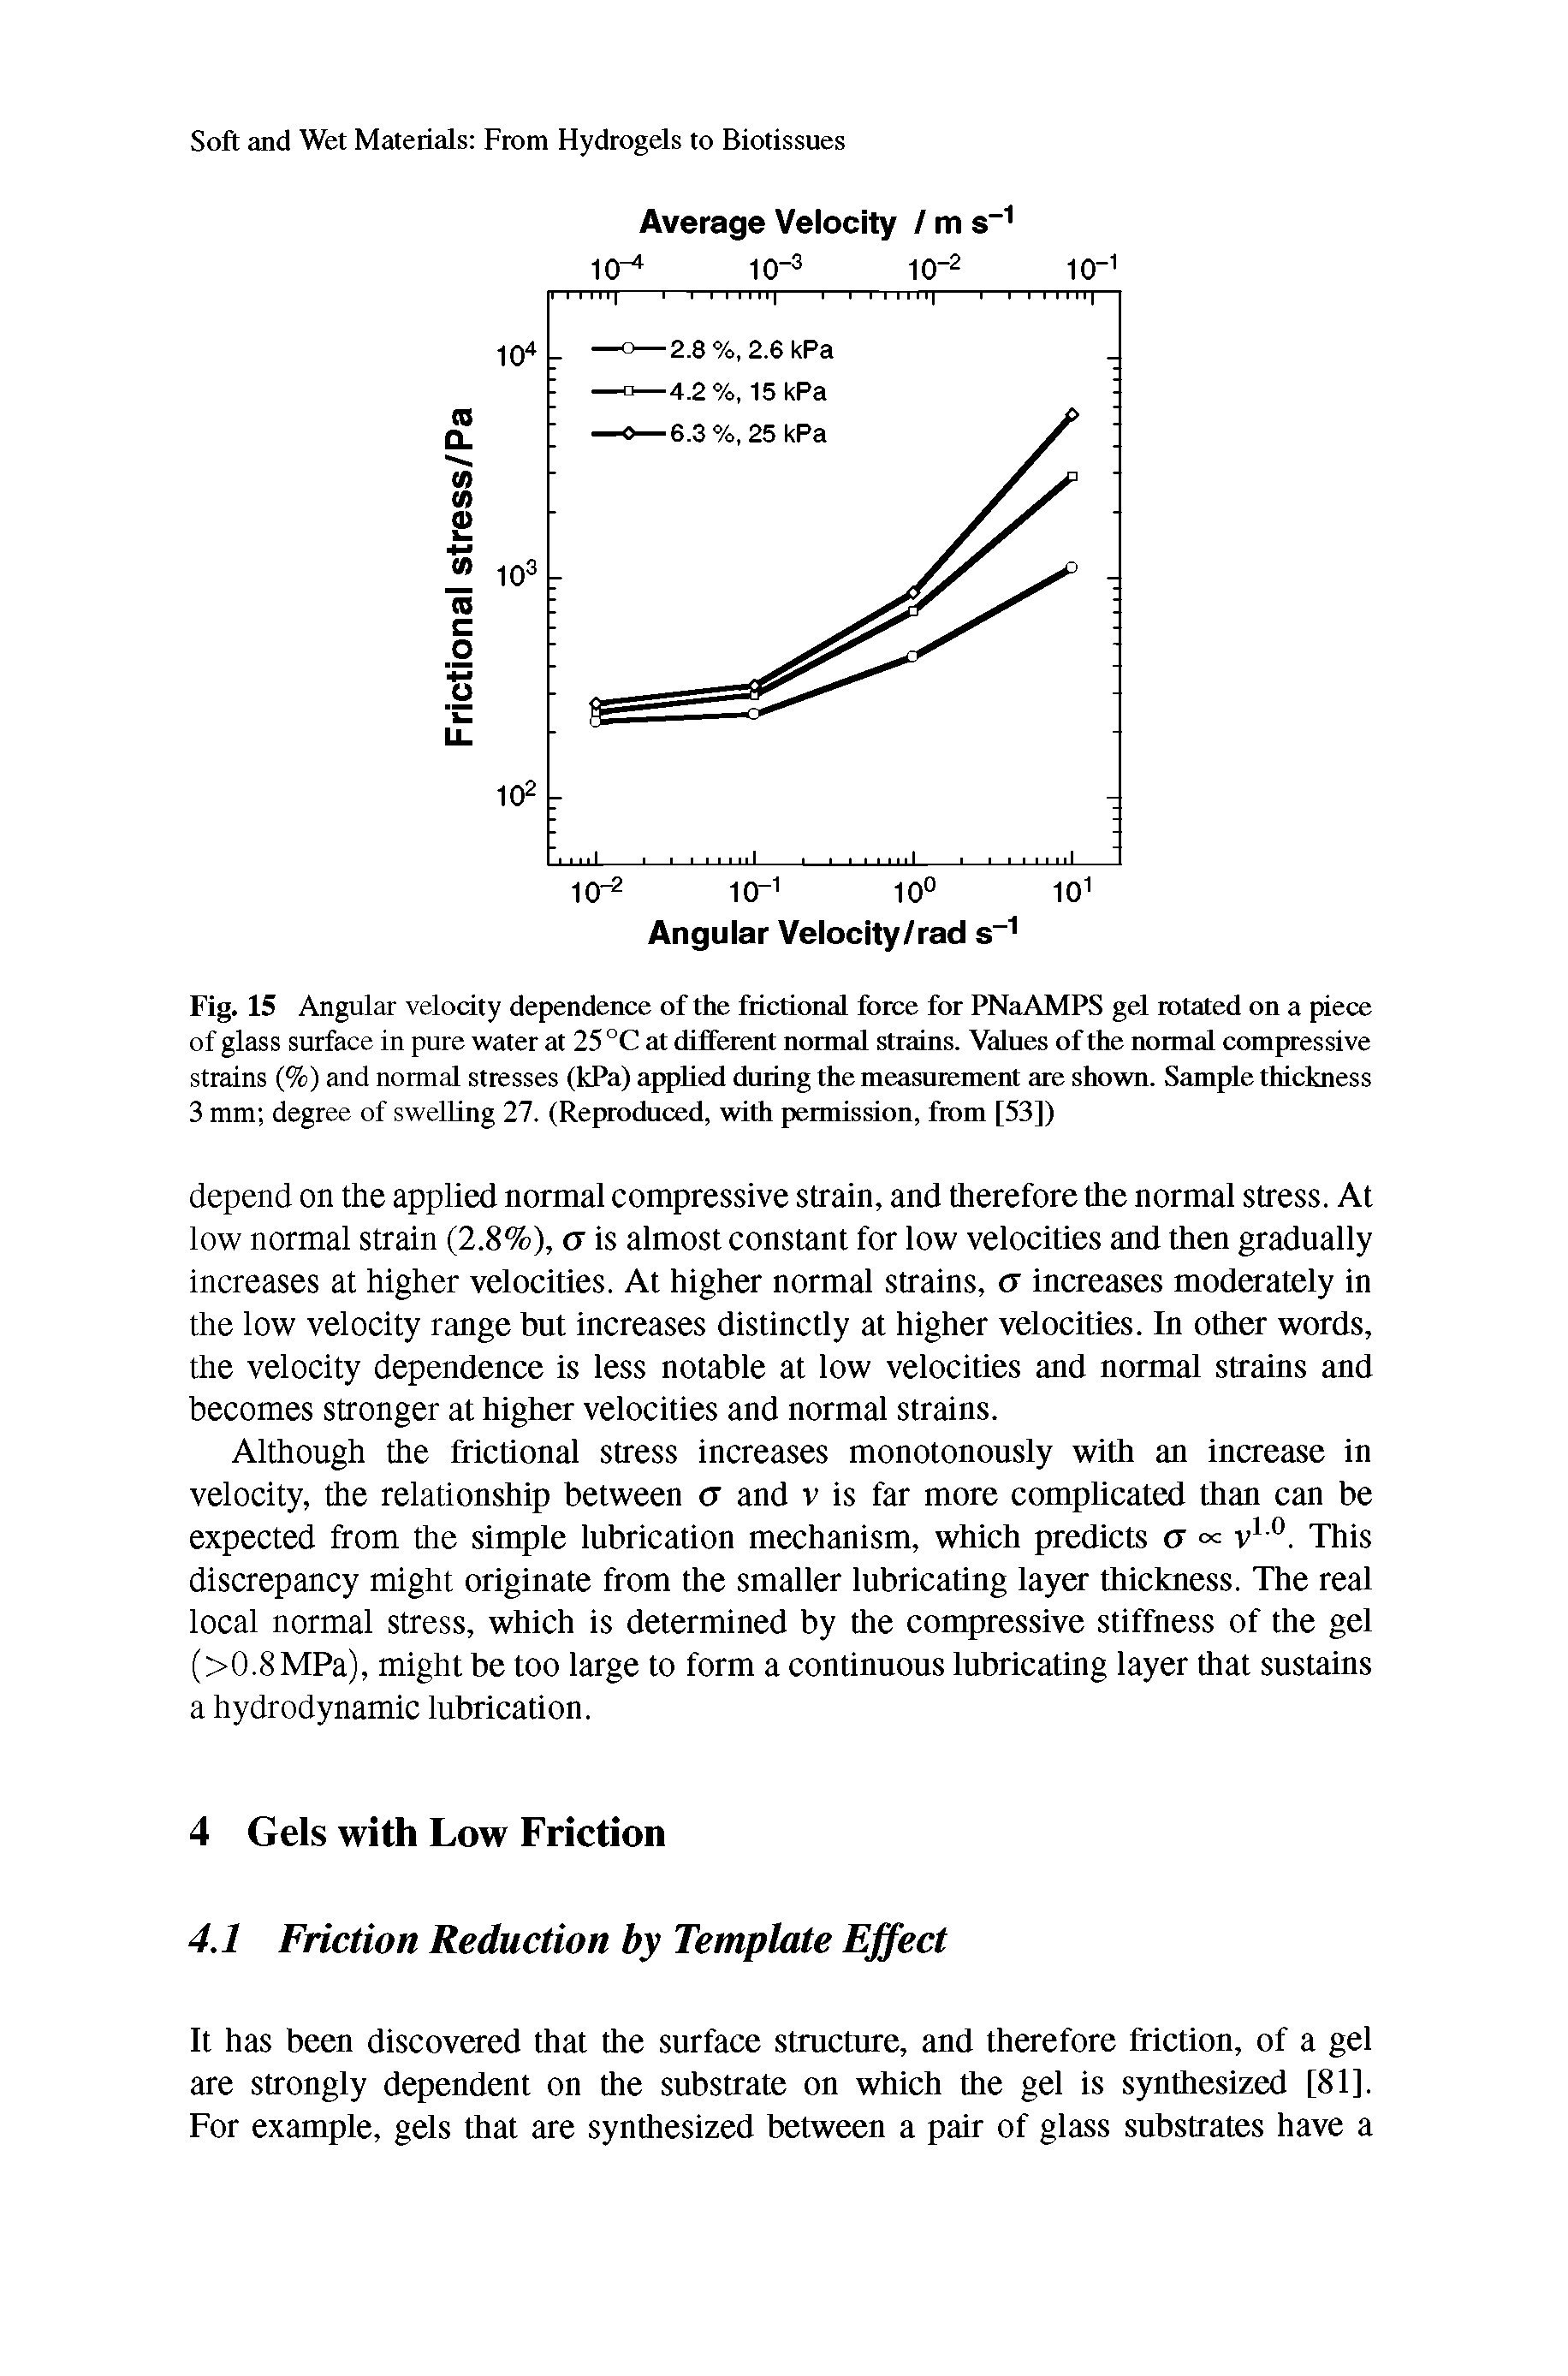 Fig. 15 Angular velocity dependence of the frictional force for PNaAMPS gel rotated on a piece of glass surface in pure water at 25 °C at different normal strains. Values of the normal compressive strains (%) and normal stresses (kPa) applied during the measurement are shown. Sample thickness 3 mm degree of swelling 27. (Reproduced, with permission, from [53])...